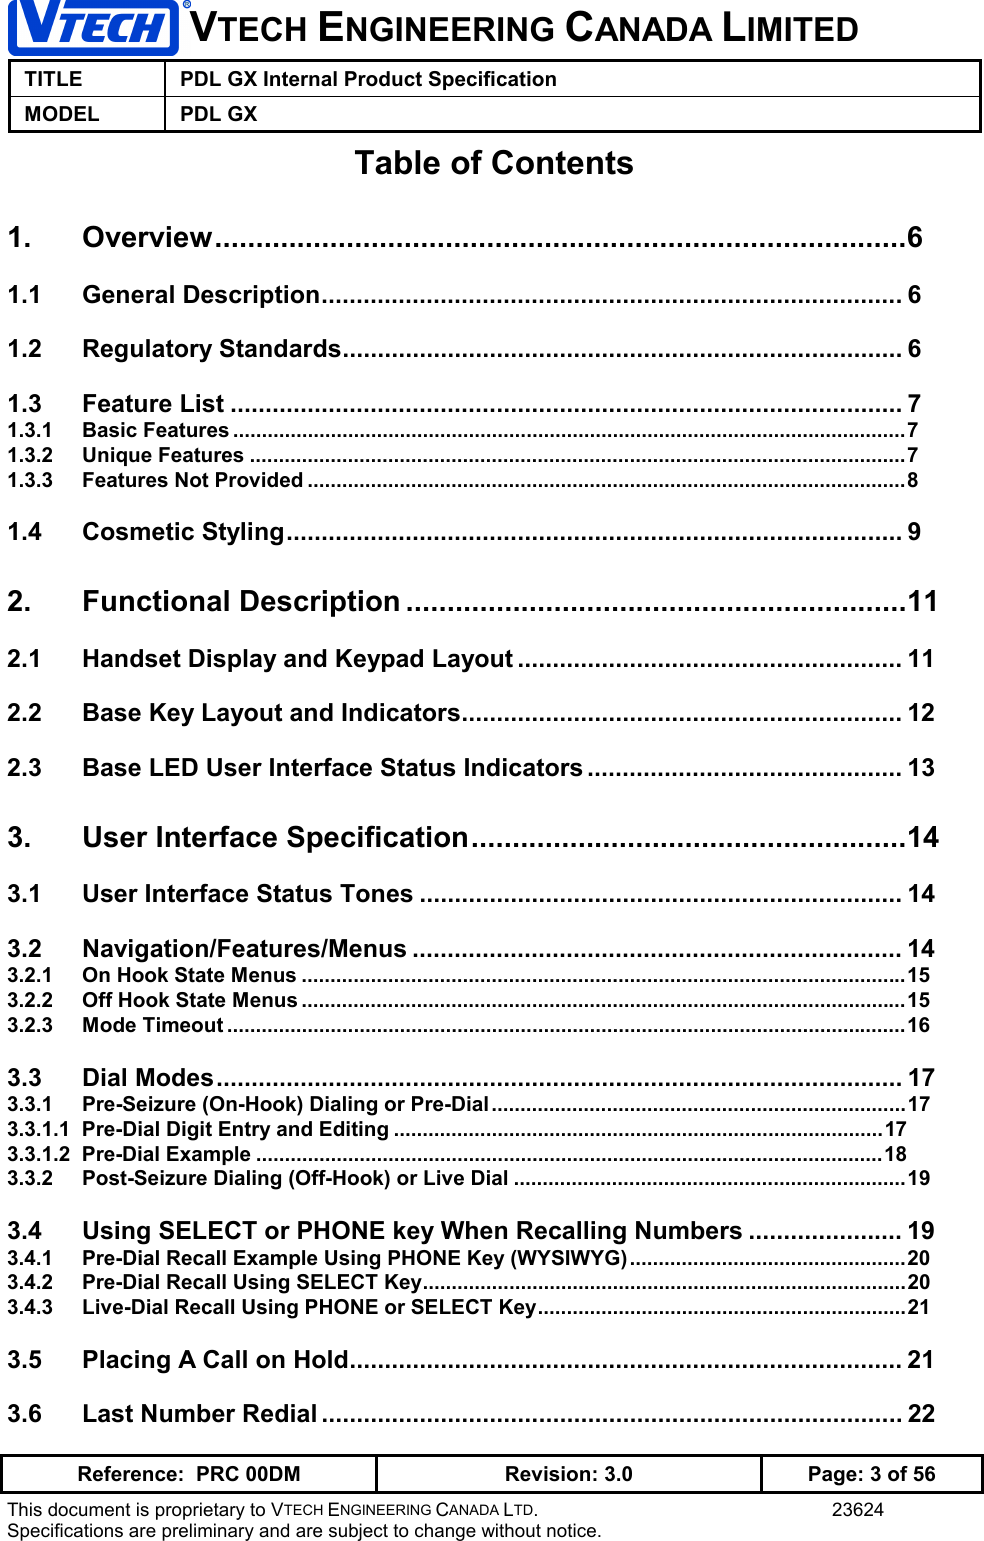 VTECH ENGINEERING CANADA LIMITEDTITLE PDL GX Internal Product SpecificationMODEL PDL GXReference:  PRC 00DM Revision: 3.0 Page: 3 of 56This document is proprietary to VTECH ENGINEERING CANADA LTD. 23624Specifications are preliminary and are subject to change without notice.Table of Contents1. Overview....................................................................................61.1 General Description................................................................................... 61.2 Regulatory Standards................................................................................ 61.3 Feature List ................................................................................................ 71.3.1 Basic Features .....................................................................................................................71.3.2 Unique Features ..................................................................................................................71.3.3 Features Not Provided ........................................................................................................81.4 Cosmetic Styling........................................................................................ 92. Functional Description .............................................................112.1 Handset Display and Keypad Layout ....................................................... 112.2 Base Key Layout and Indicators............................................................... 122.3 Base LED User Interface Status Indicators ............................................. 133. User Interface Specification.....................................................143.1 User Interface Status Tones ..................................................................... 143.2 Navigation/Features/Menus ...................................................................... 143.2.1 On Hook State Menus .........................................................................................................153.2.2 Off Hook State Menus .........................................................................................................153.2.3 Mode Timeout ......................................................................................................................163.3 Dial Modes.................................................................................................. 173.3.1 Pre-Seizure (On-Hook) Dialing or Pre-Dial ........................................................................173.3.1.1  Pre-Dial Digit Entry and Editing .....................................................................................173.3.1.2  Pre-Dial Example .............................................................................................................183.3.2 Post-Seizure Dialing (Off-Hook) or Live Dial ....................................................................193.4 Using SELECT or PHONE key When Recalling Numbers ...................... 193.4.1 Pre-Dial Recall Example Using PHONE Key (WYSIWYG)................................................203.4.2 Pre-Dial Recall Using SELECT Key....................................................................................203.4.3 Live-Dial Recall Using PHONE or SELECT Key................................................................213.5 Placing A Call on Hold............................................................................... 213.6 Last Number Redial ................................................................................... 22